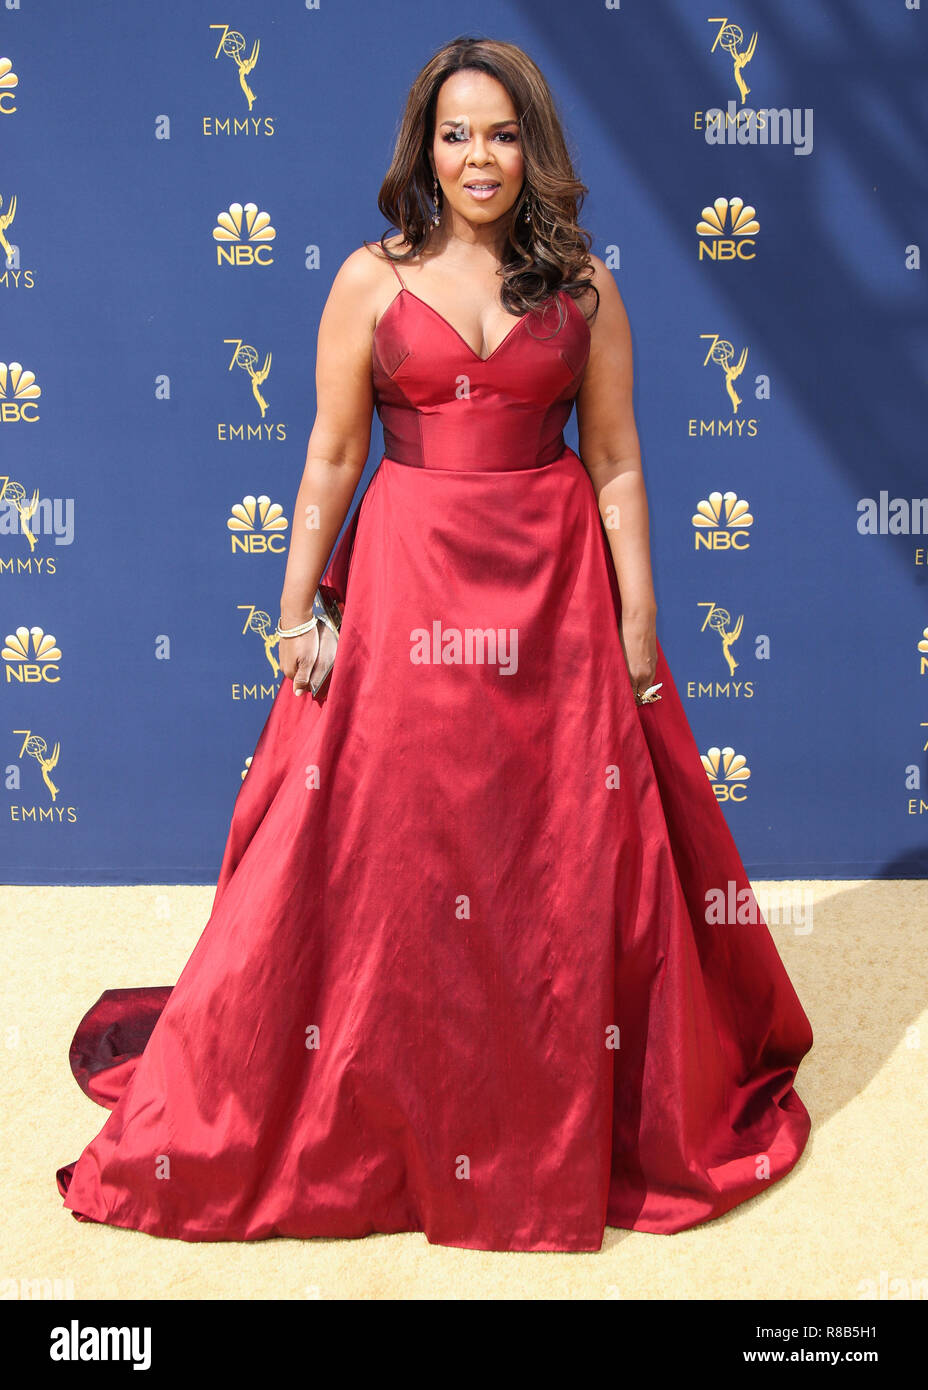 LOS ANGELES, CA, USA - SEPTEMBER 17: Paula Newsome at the 70th Annual Primetime Emmy Awards held at Microsoft Theater at L.A. Live on September 17, 2018 in Los Angeles, California, United States. (Photo by Xavier Collin/Image Press Agency) Stock Photo